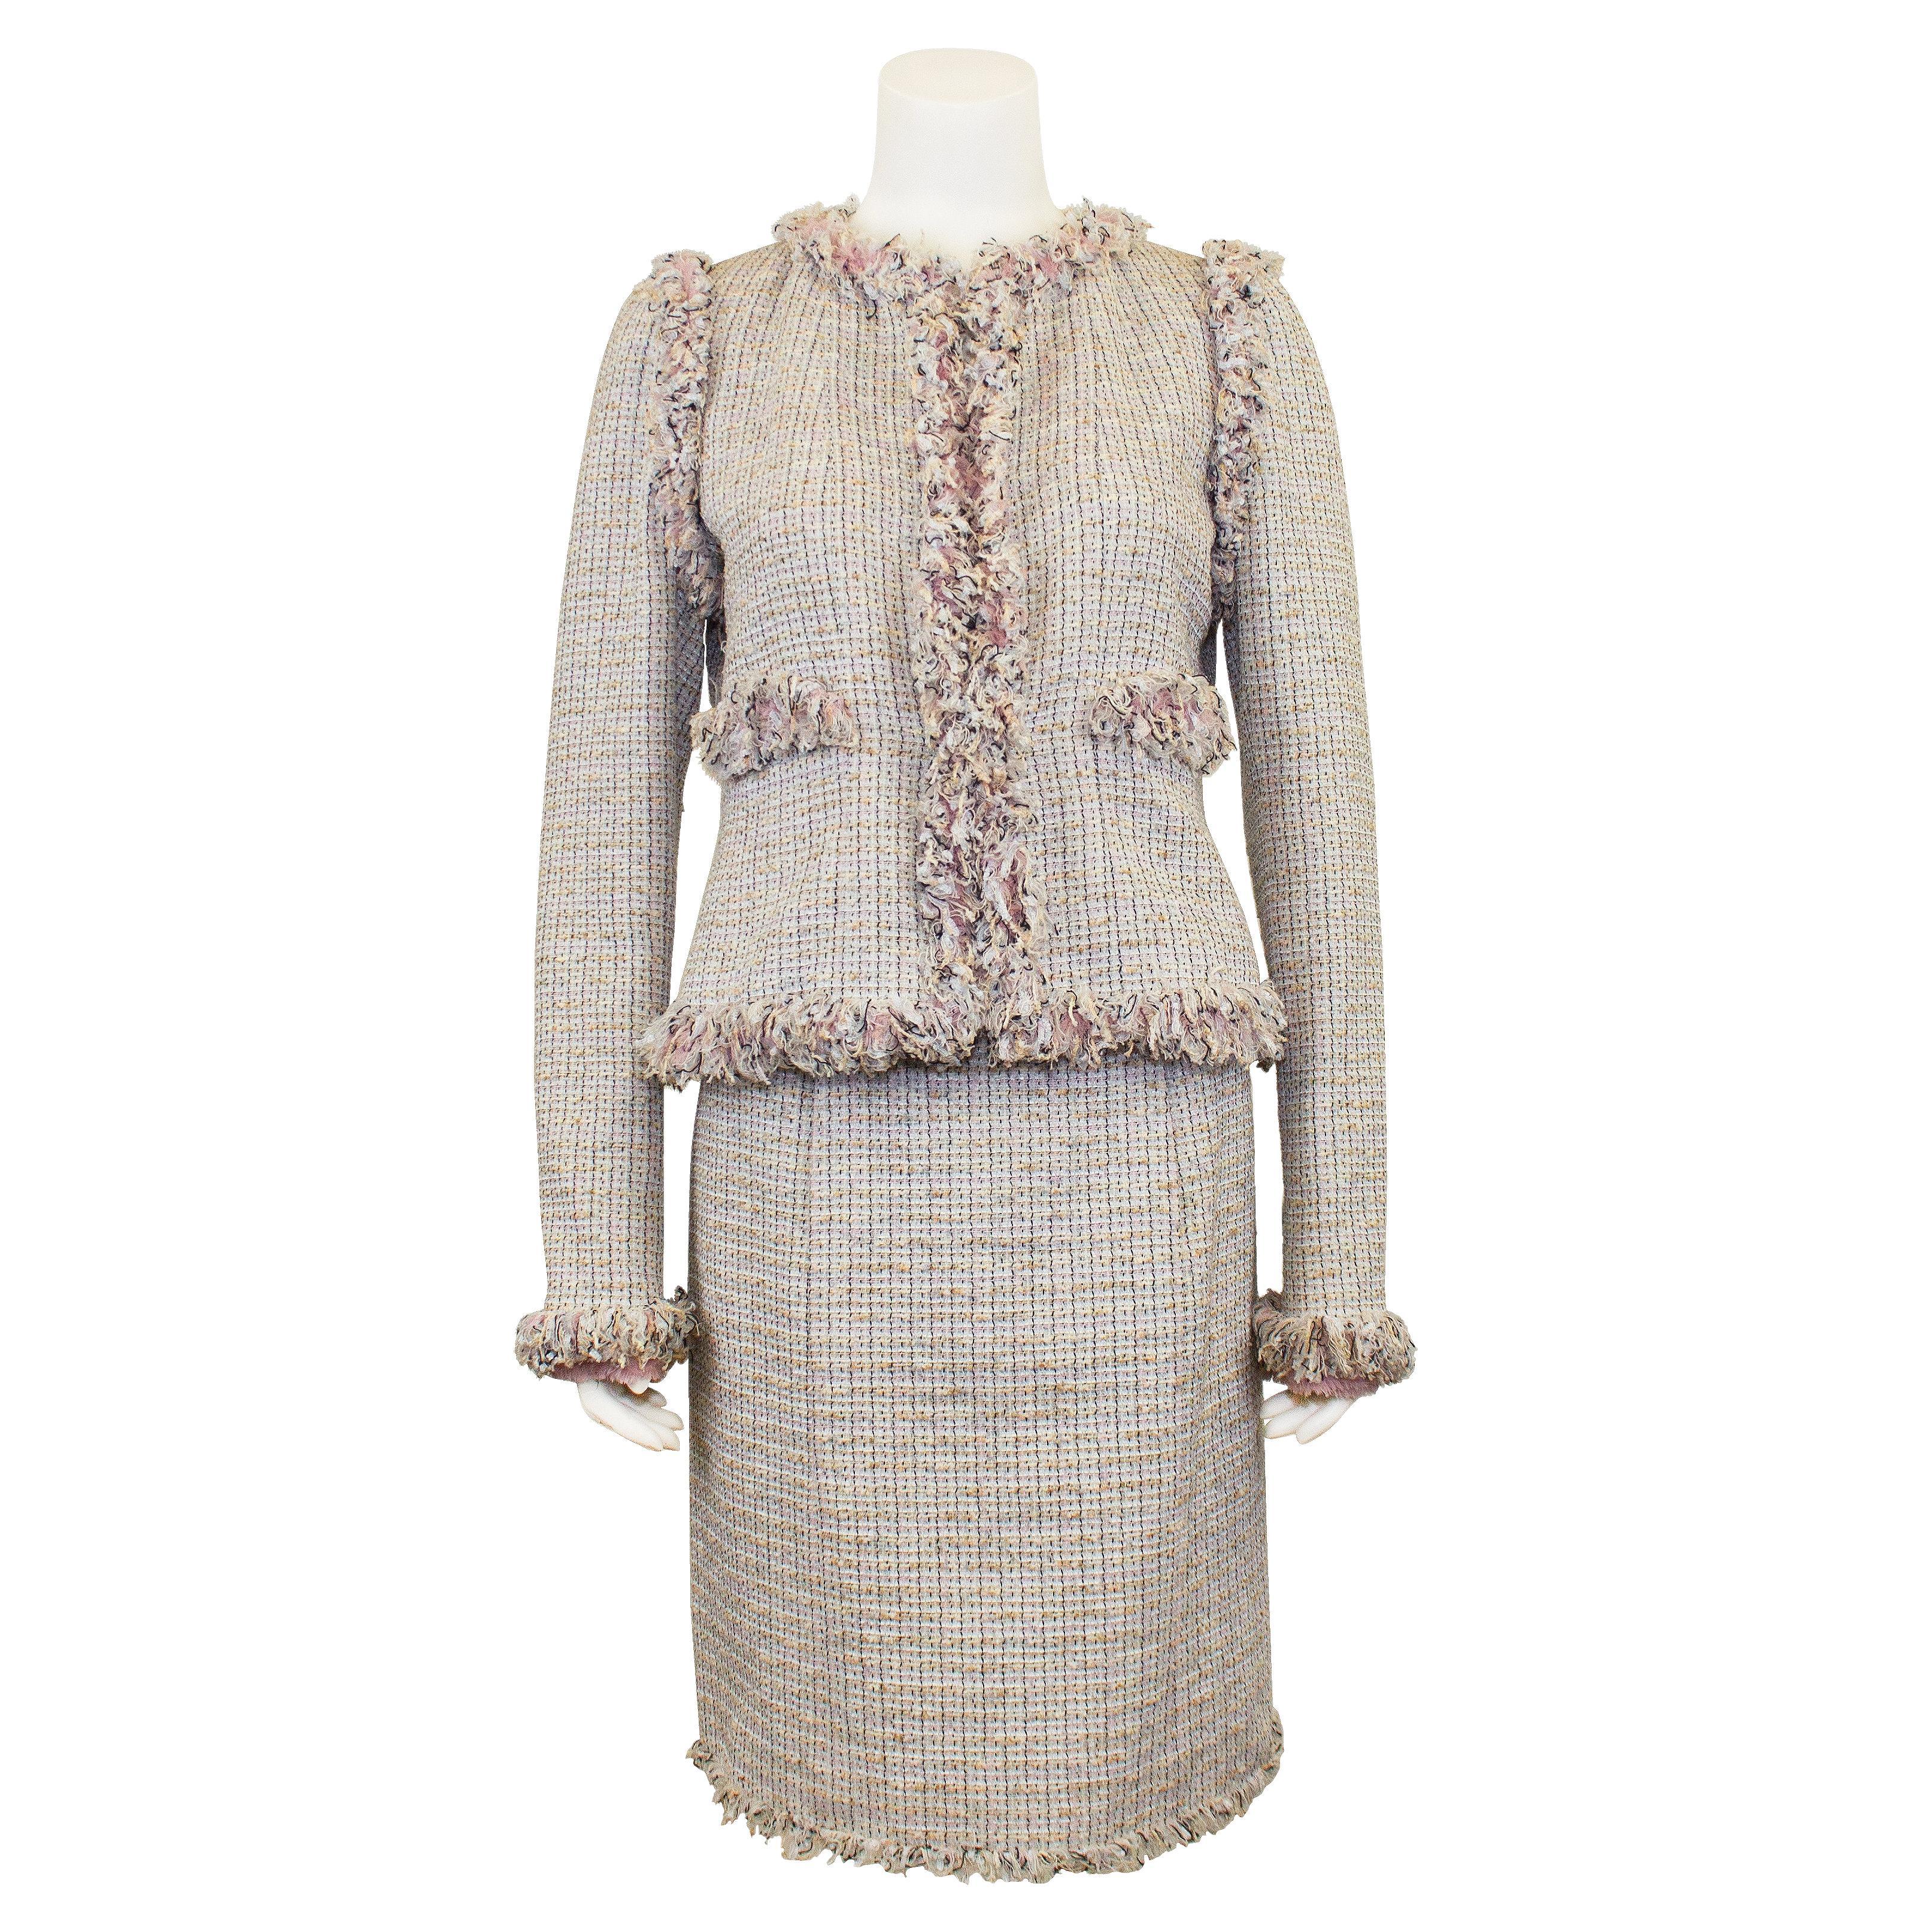 Spring 2004 Chanel Pale Pink Tweed Skirt Suit with Fringe Trim 